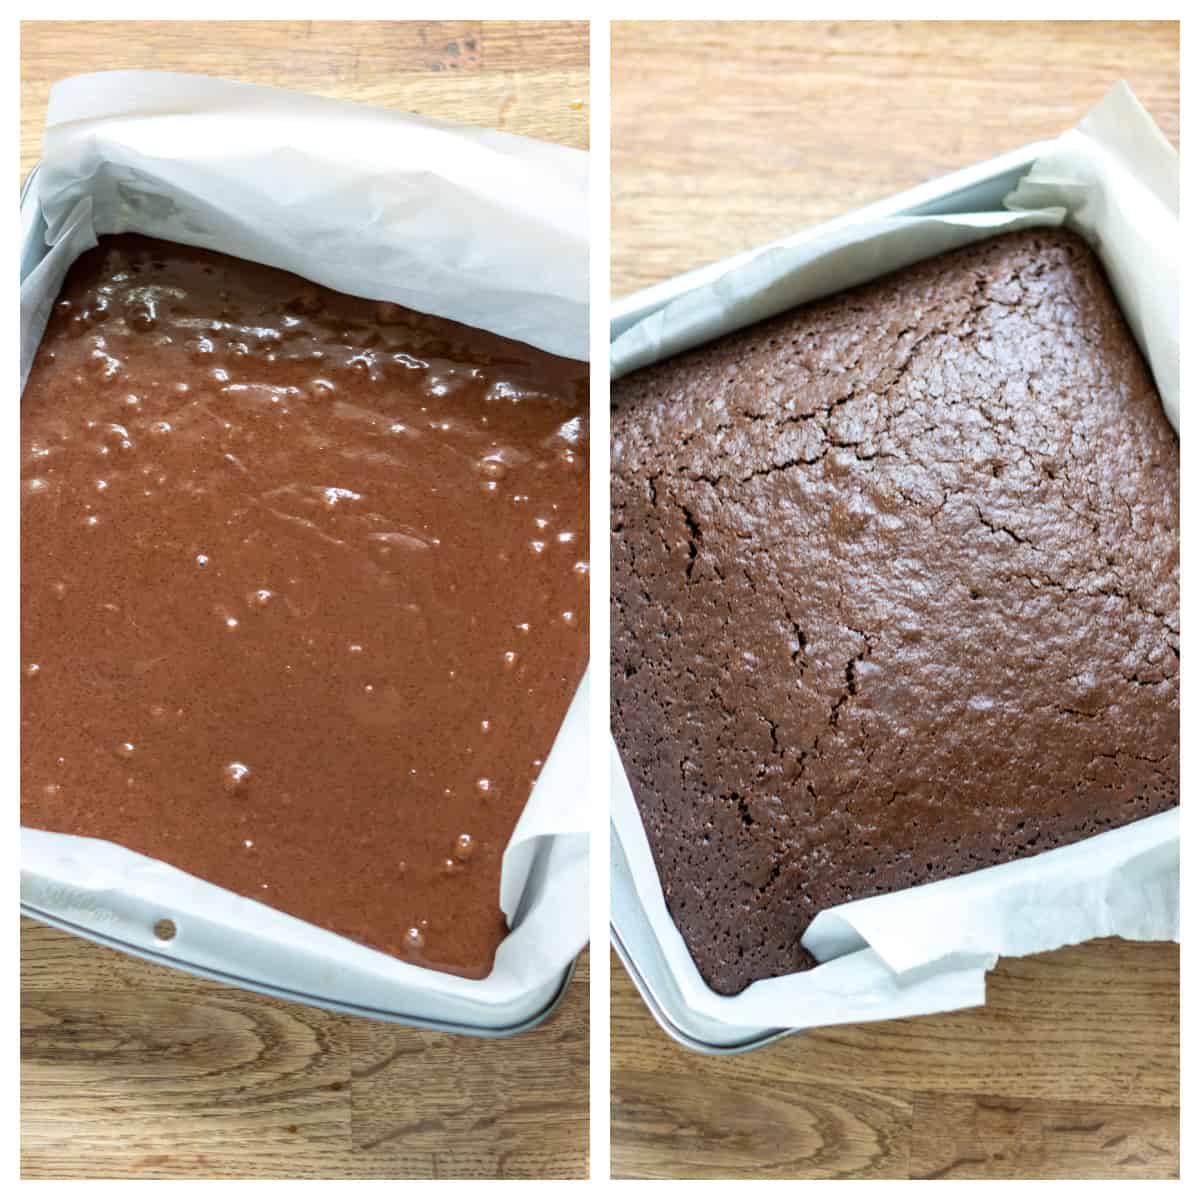 Side by side images of the batter in the pan and the finished baked cake.